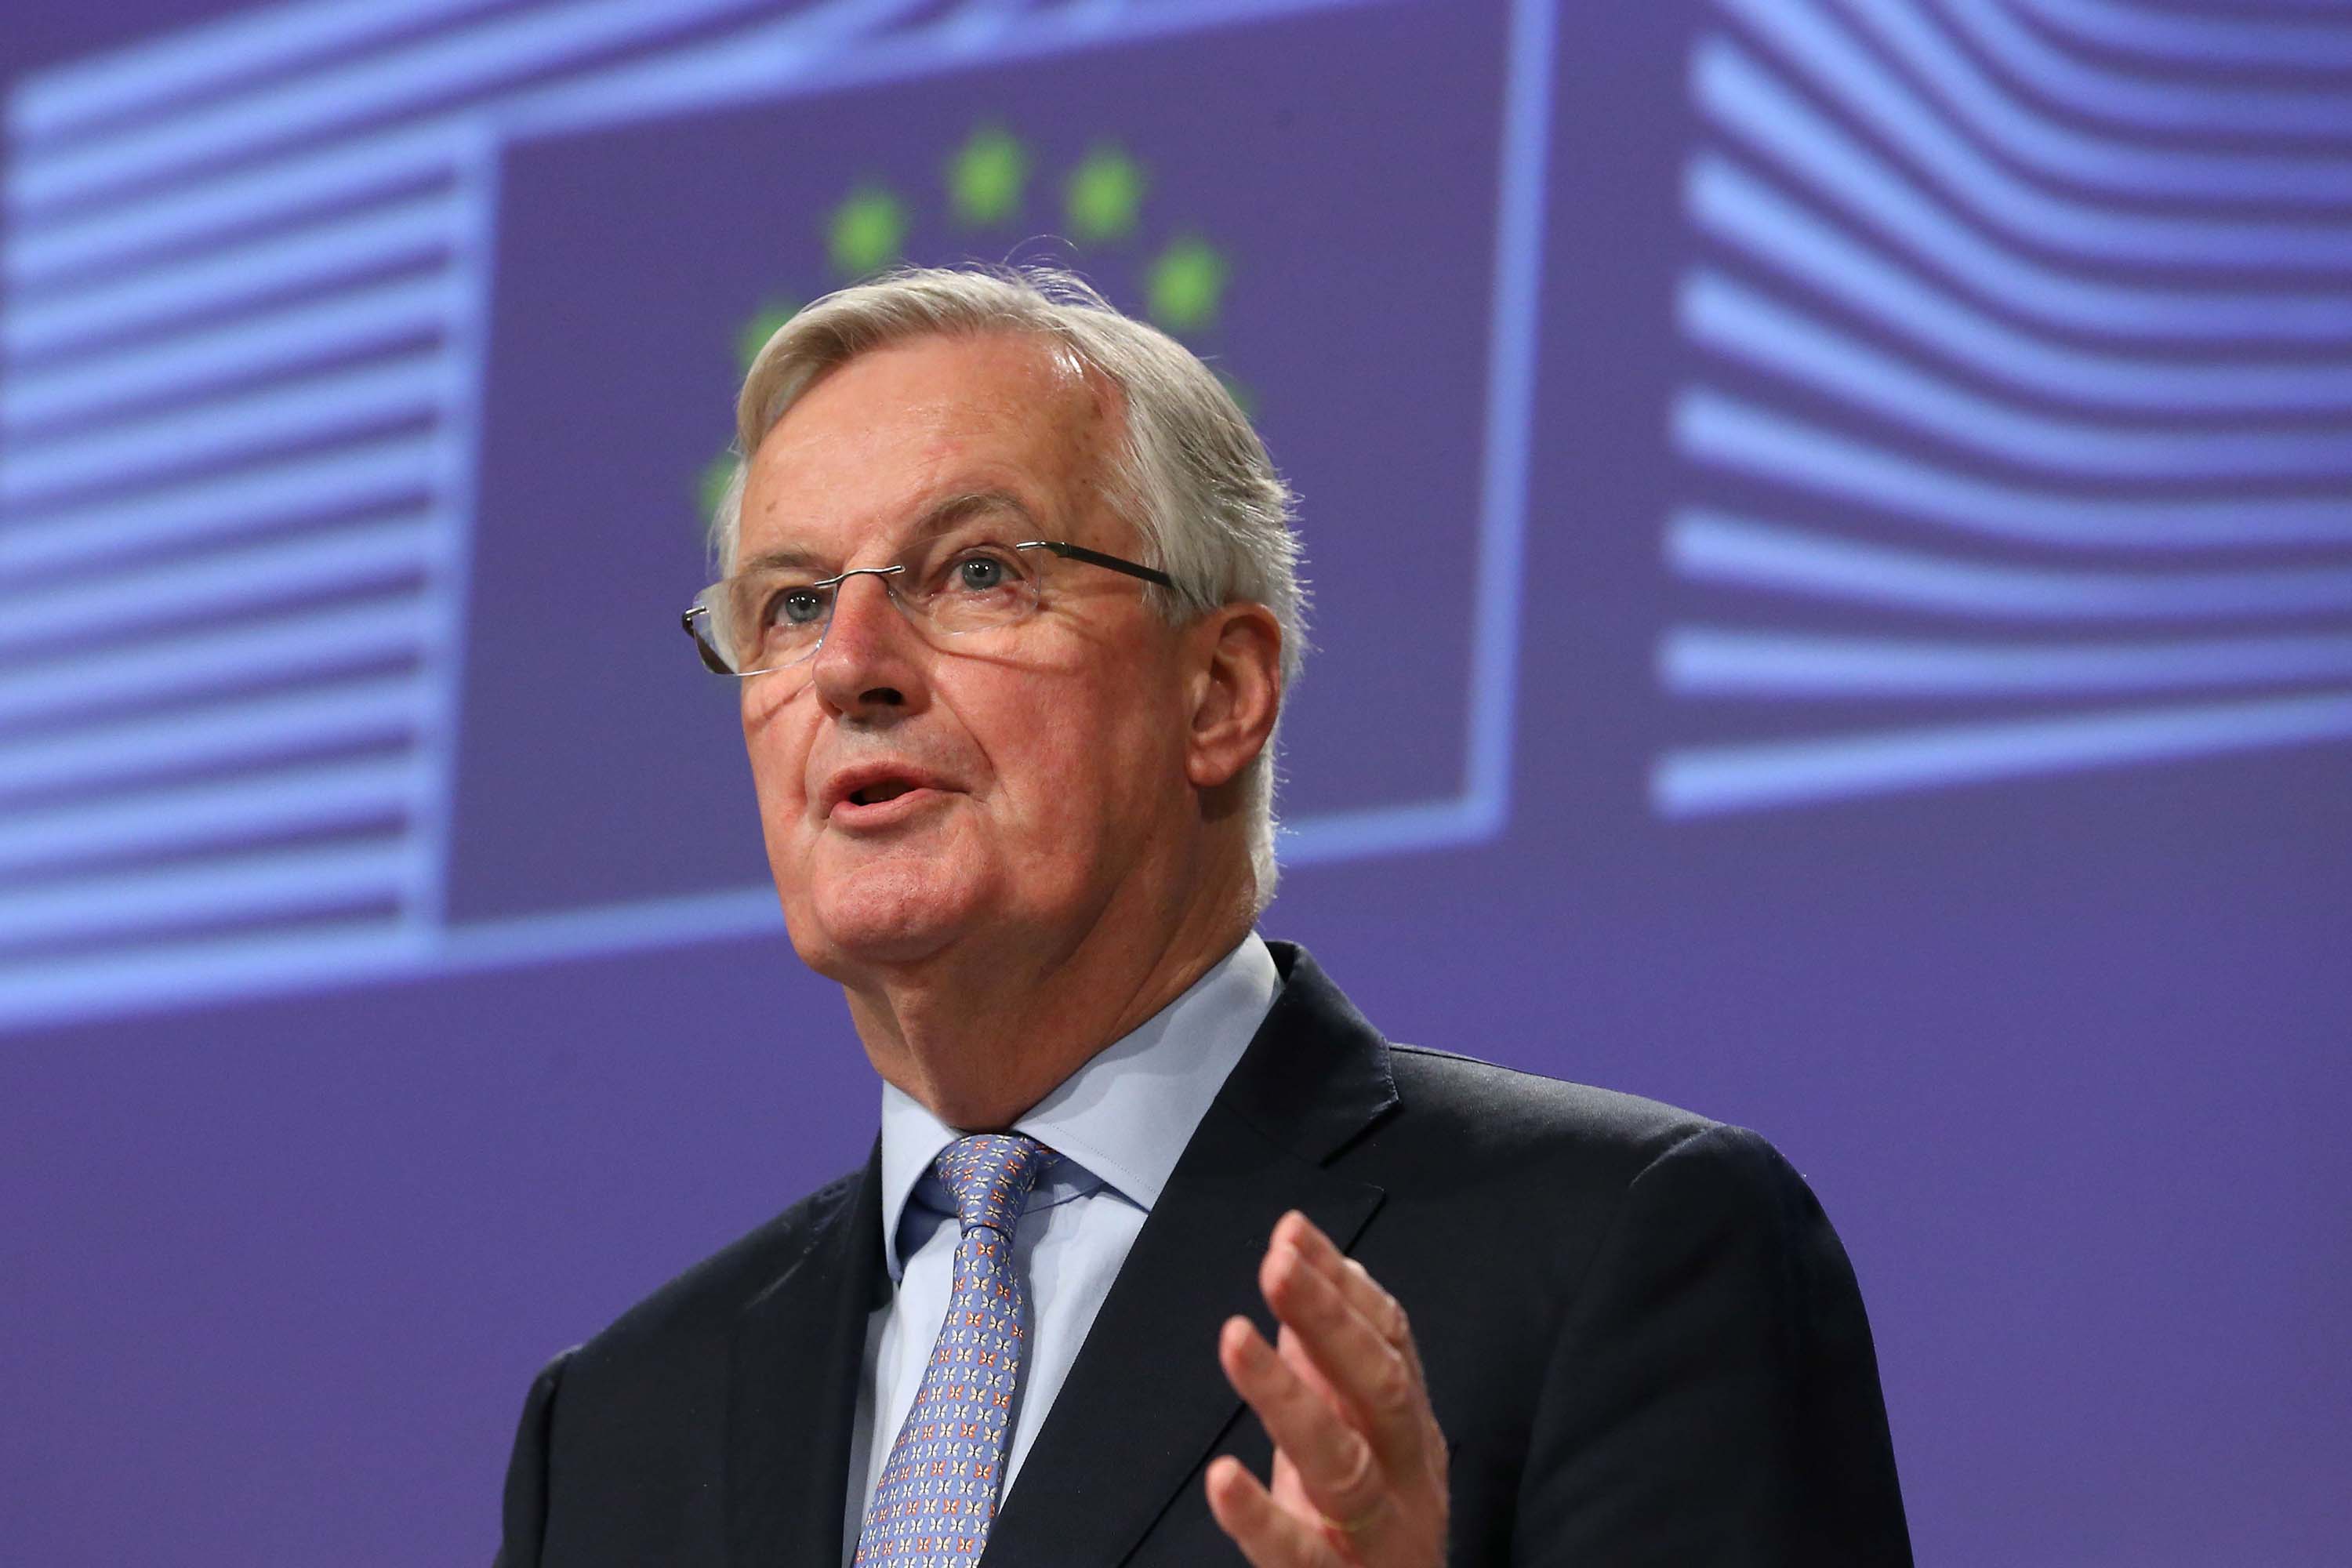 Michel Barnier, the European Commission's Head of Task Force for Relations with Britain gives a press conference at the European Union headquarters in Brussels, Belgium on March 5.